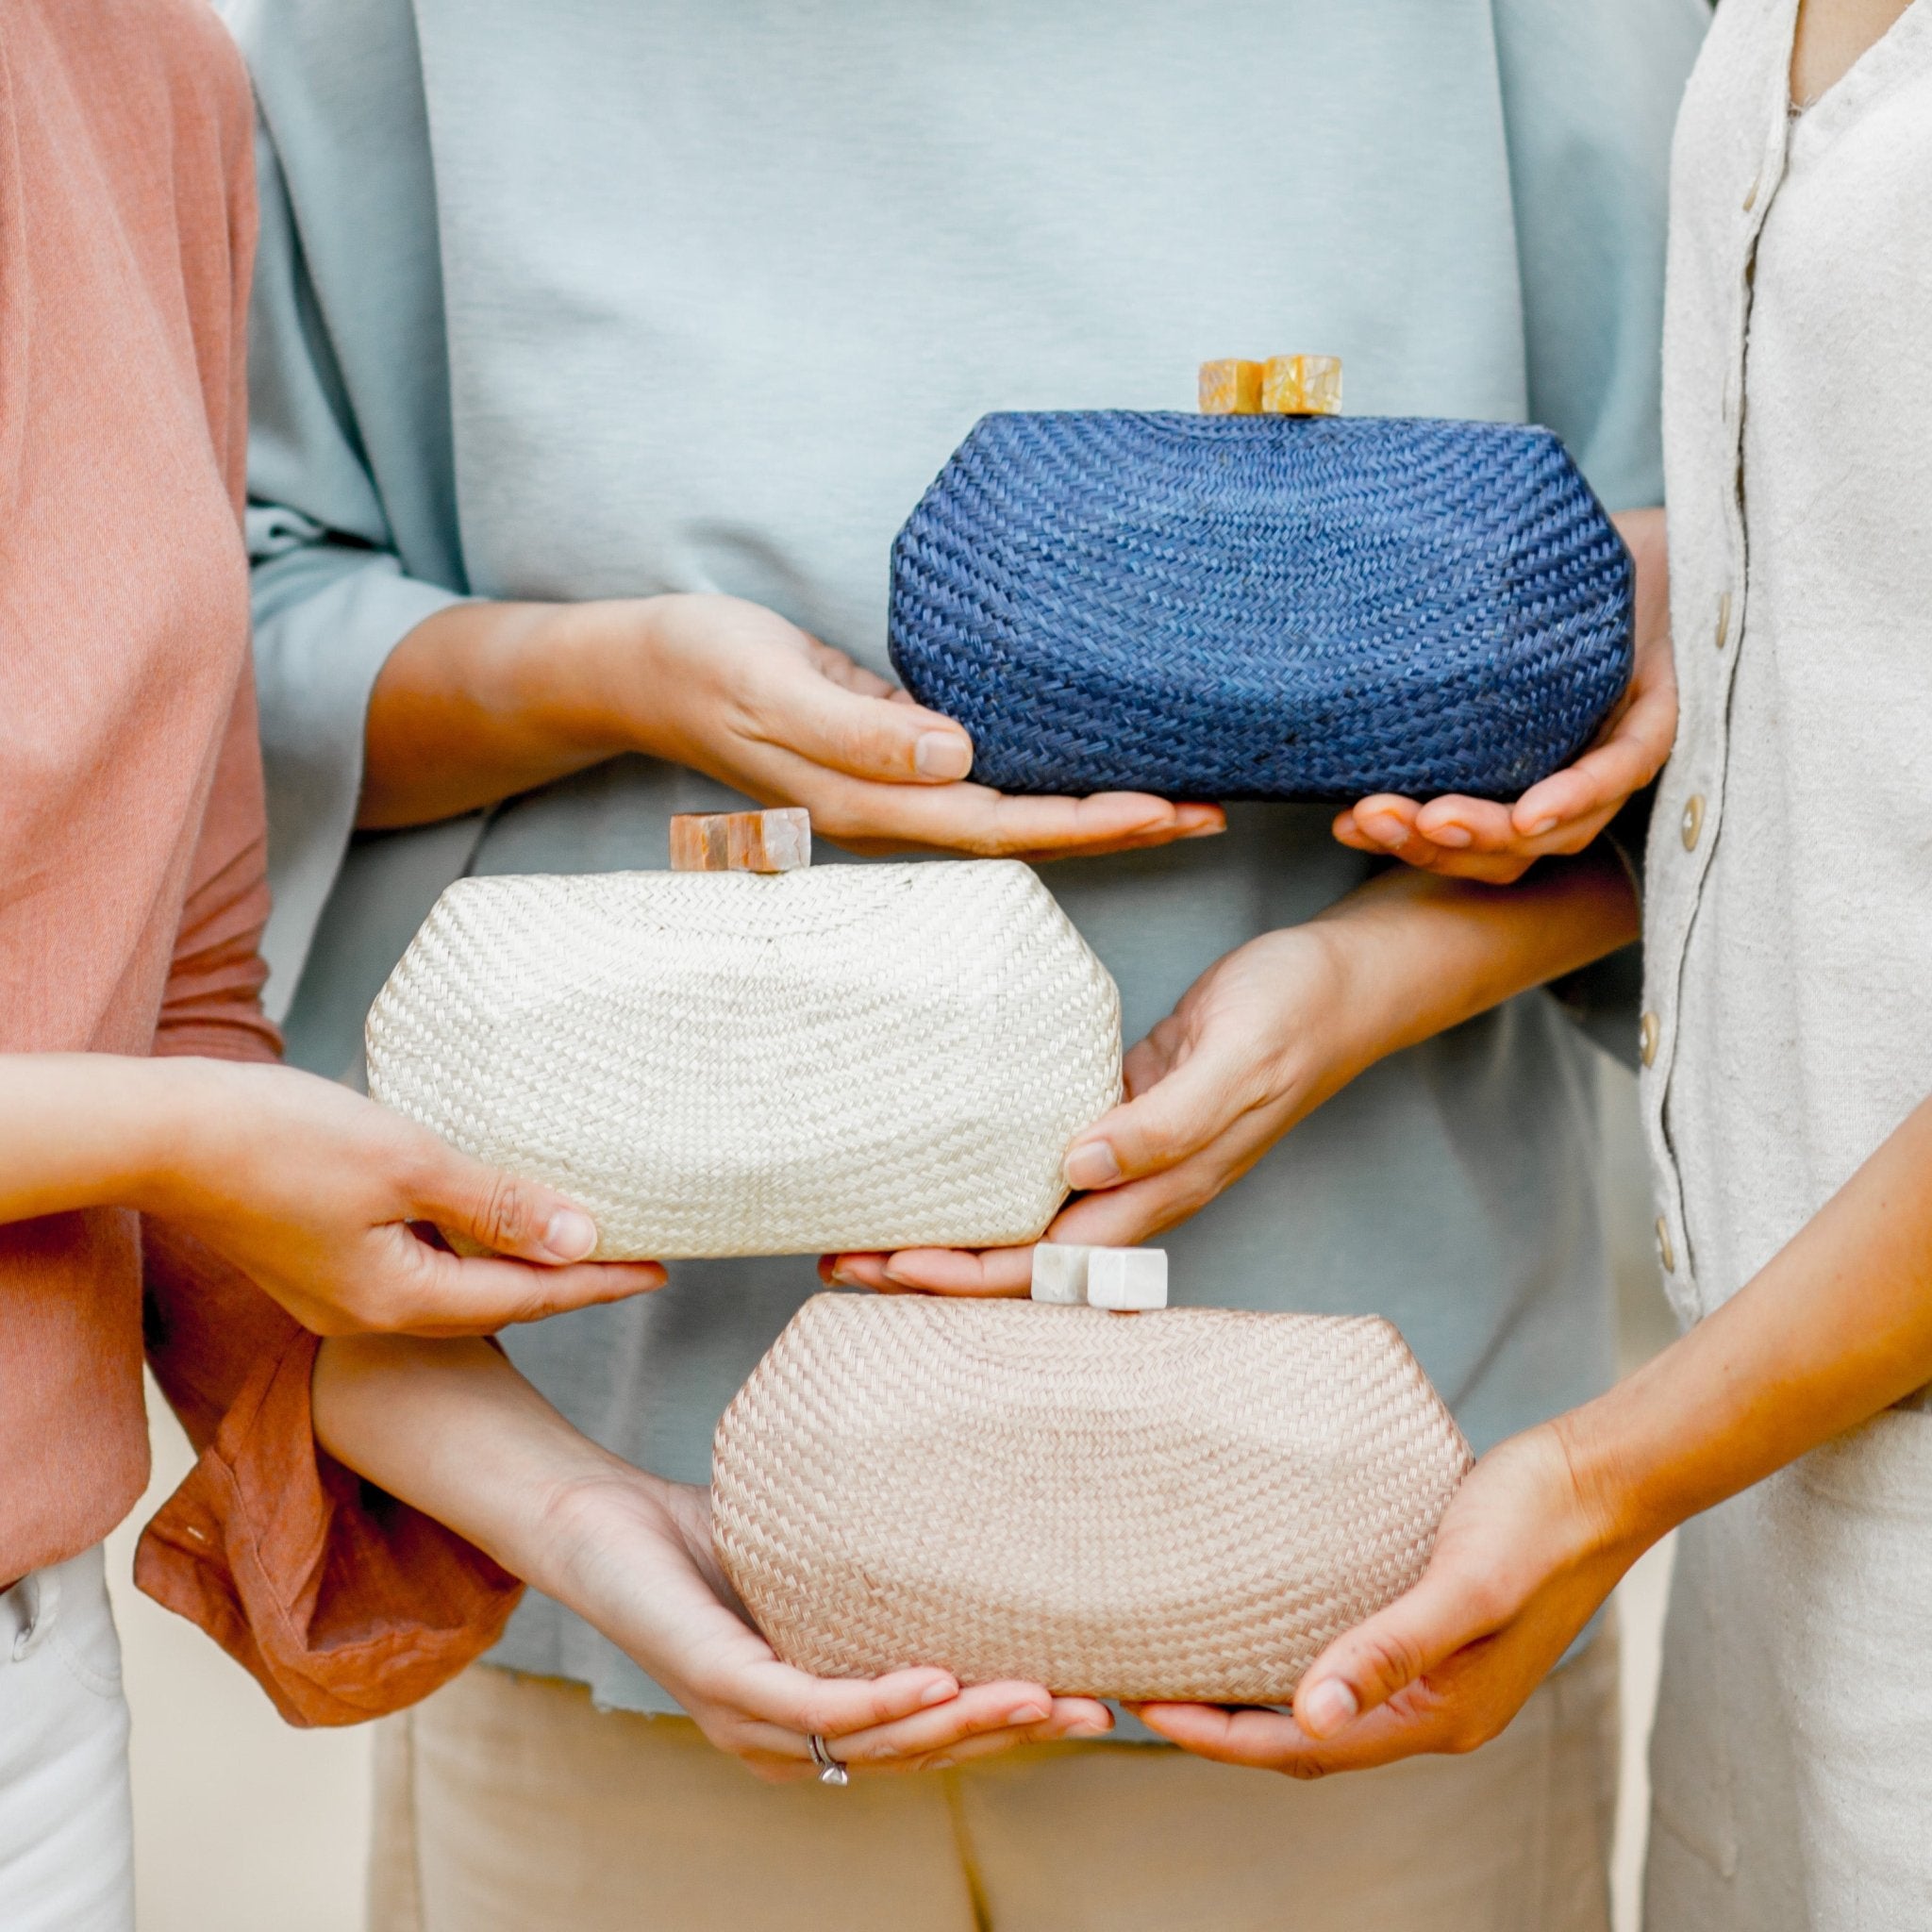 From Handmade Goods to Bags: Must-Buy Gifts For Moms - LIKHÂ